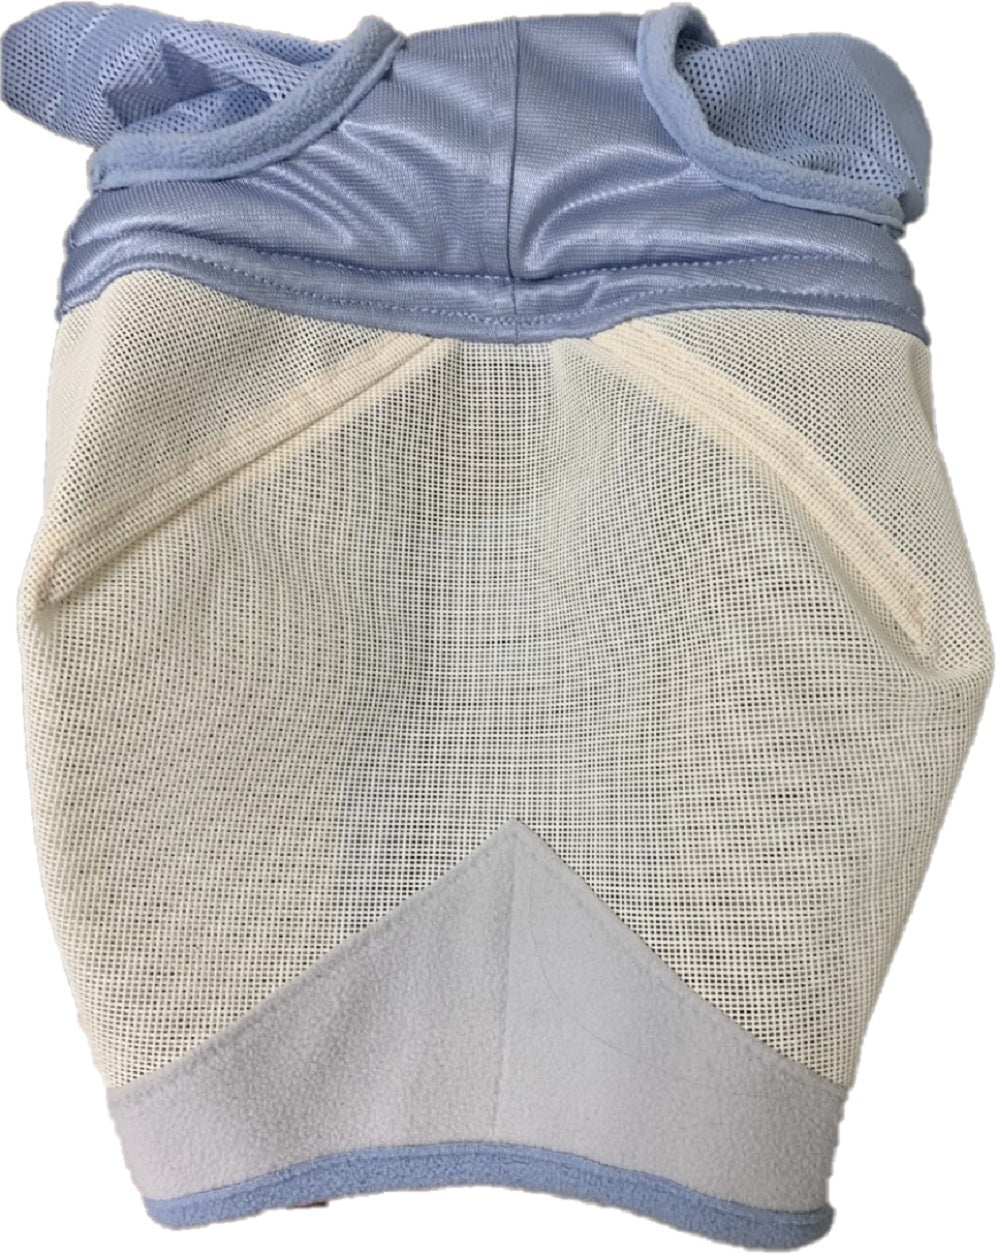 Shires Fine Mesh Horse Equine Fly Mask With Ears Light Blue  60% UV Protection